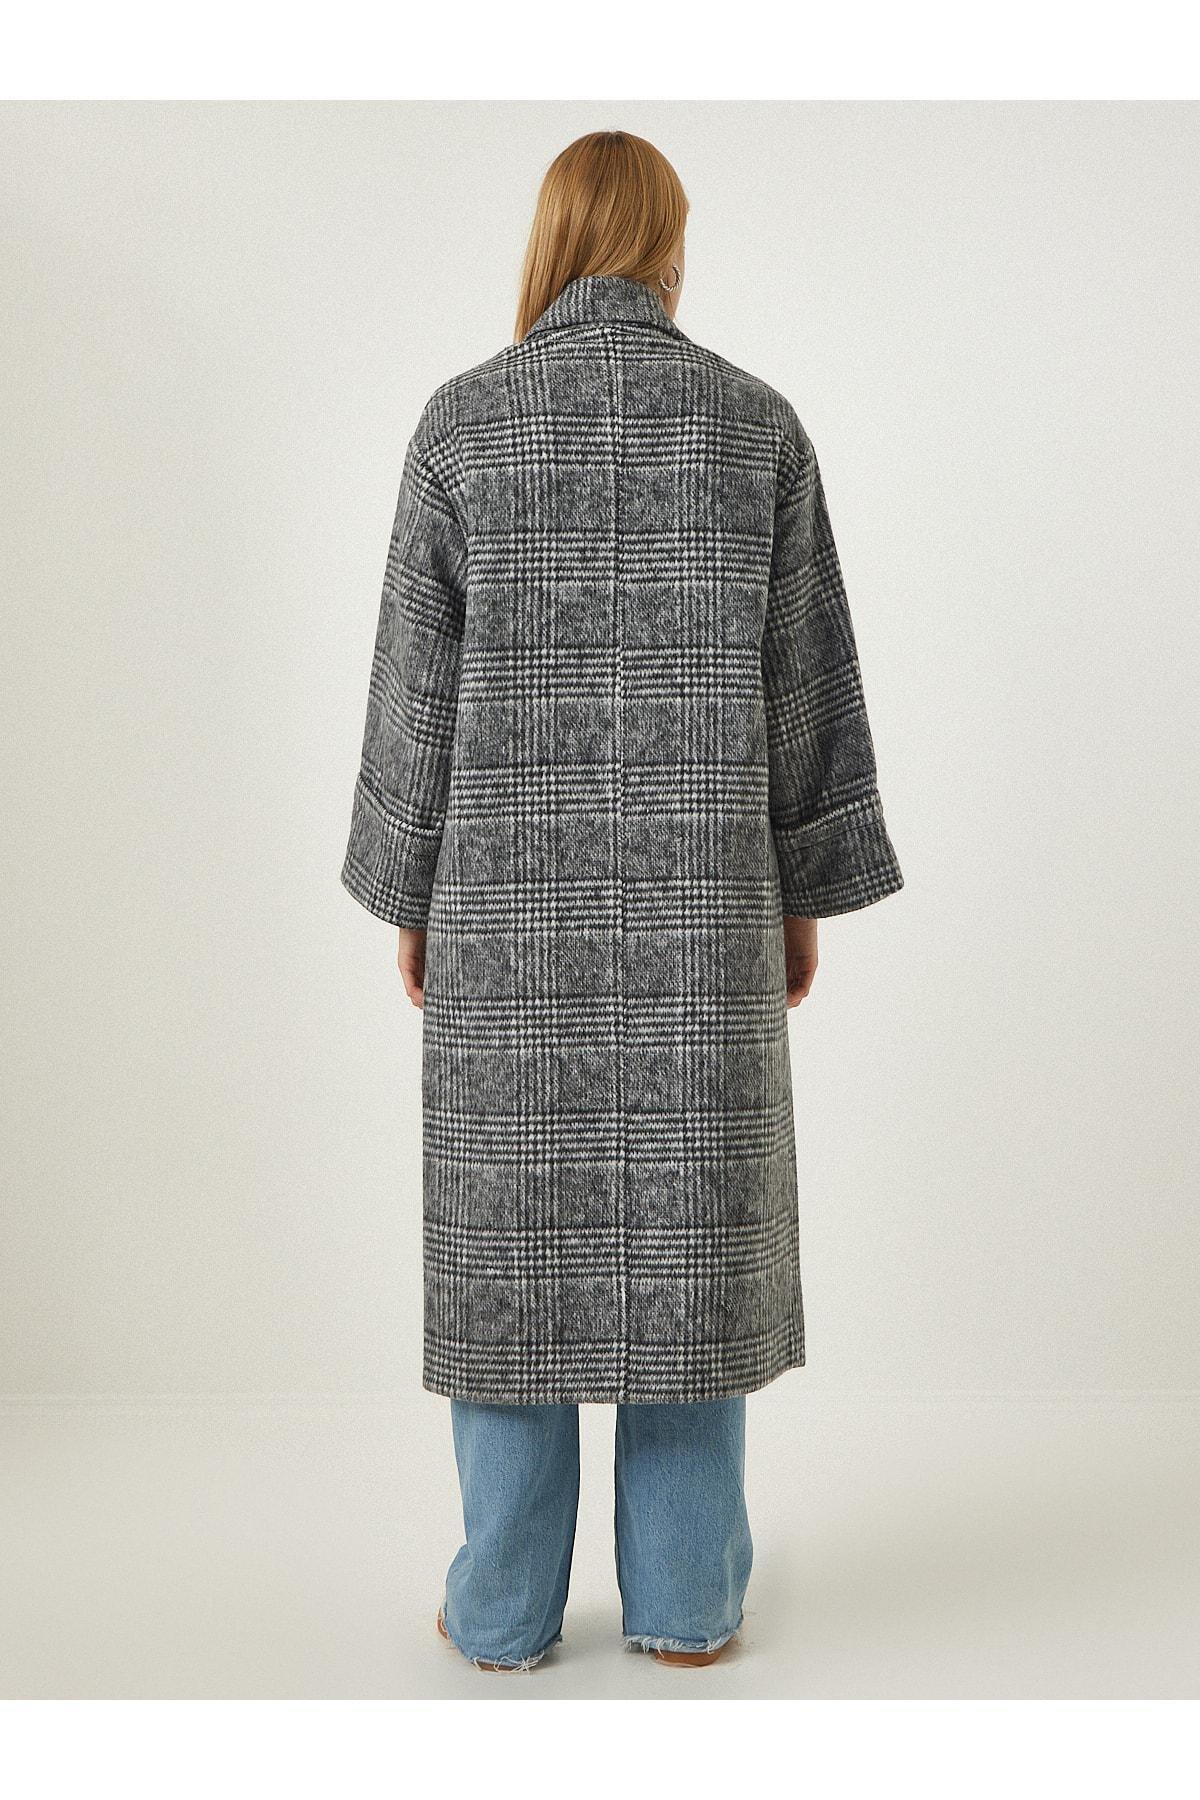 Happiness Istanbul - Black Premium Patterned Wool Stamped Coat